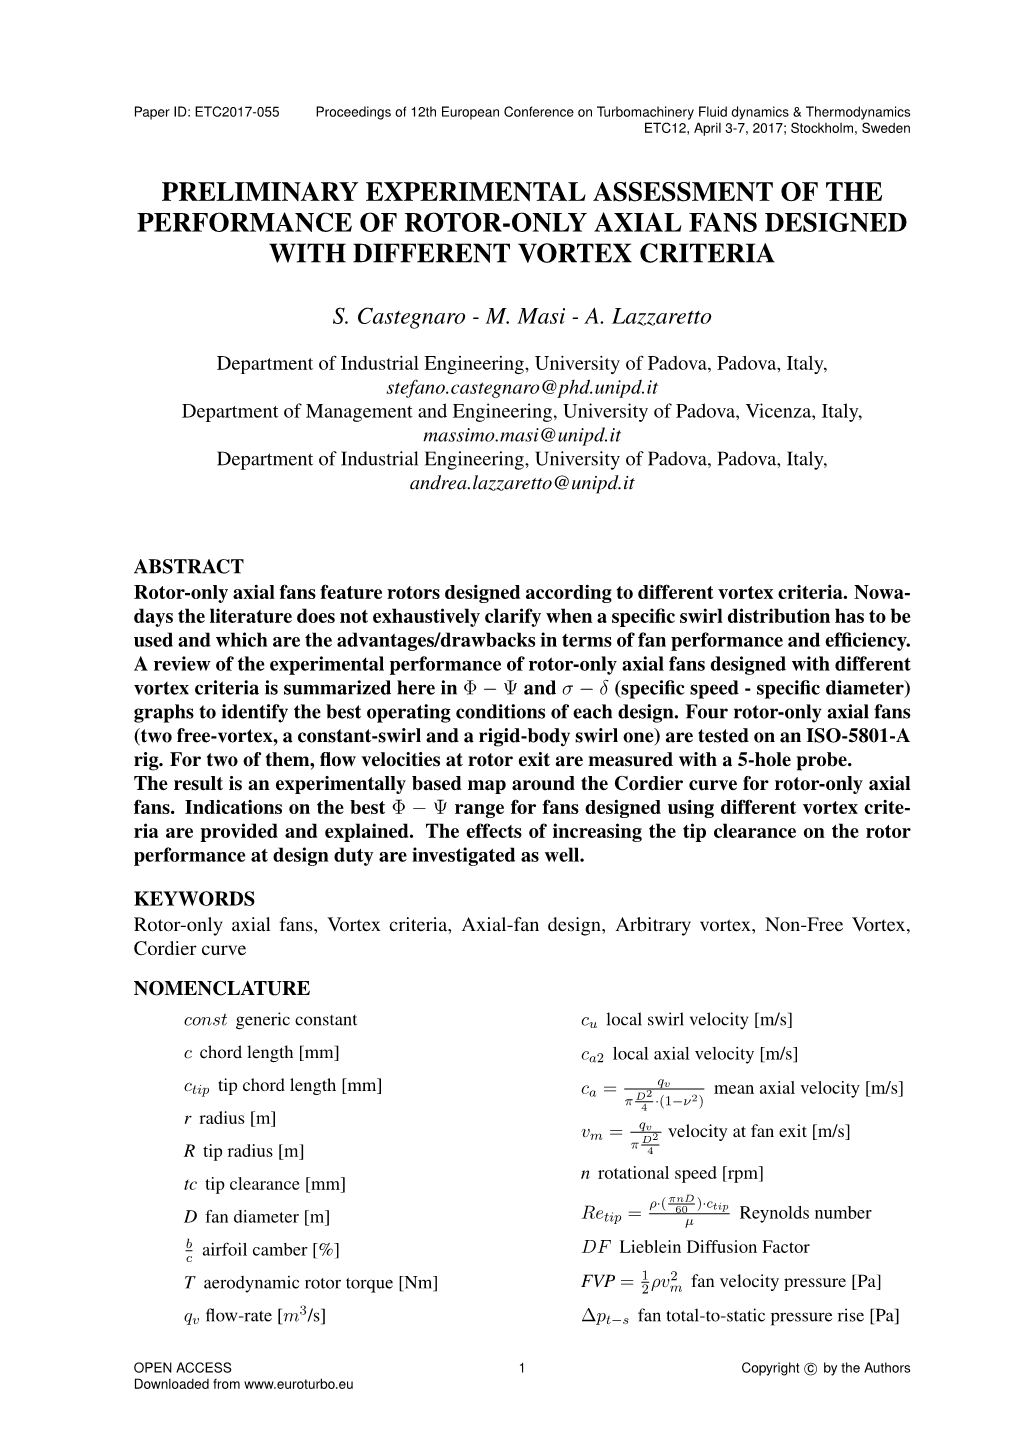 Preliminary Experimental Assessment of the Performance of Rotor-Only Axial Fans Designed with Different Vortex Criteria